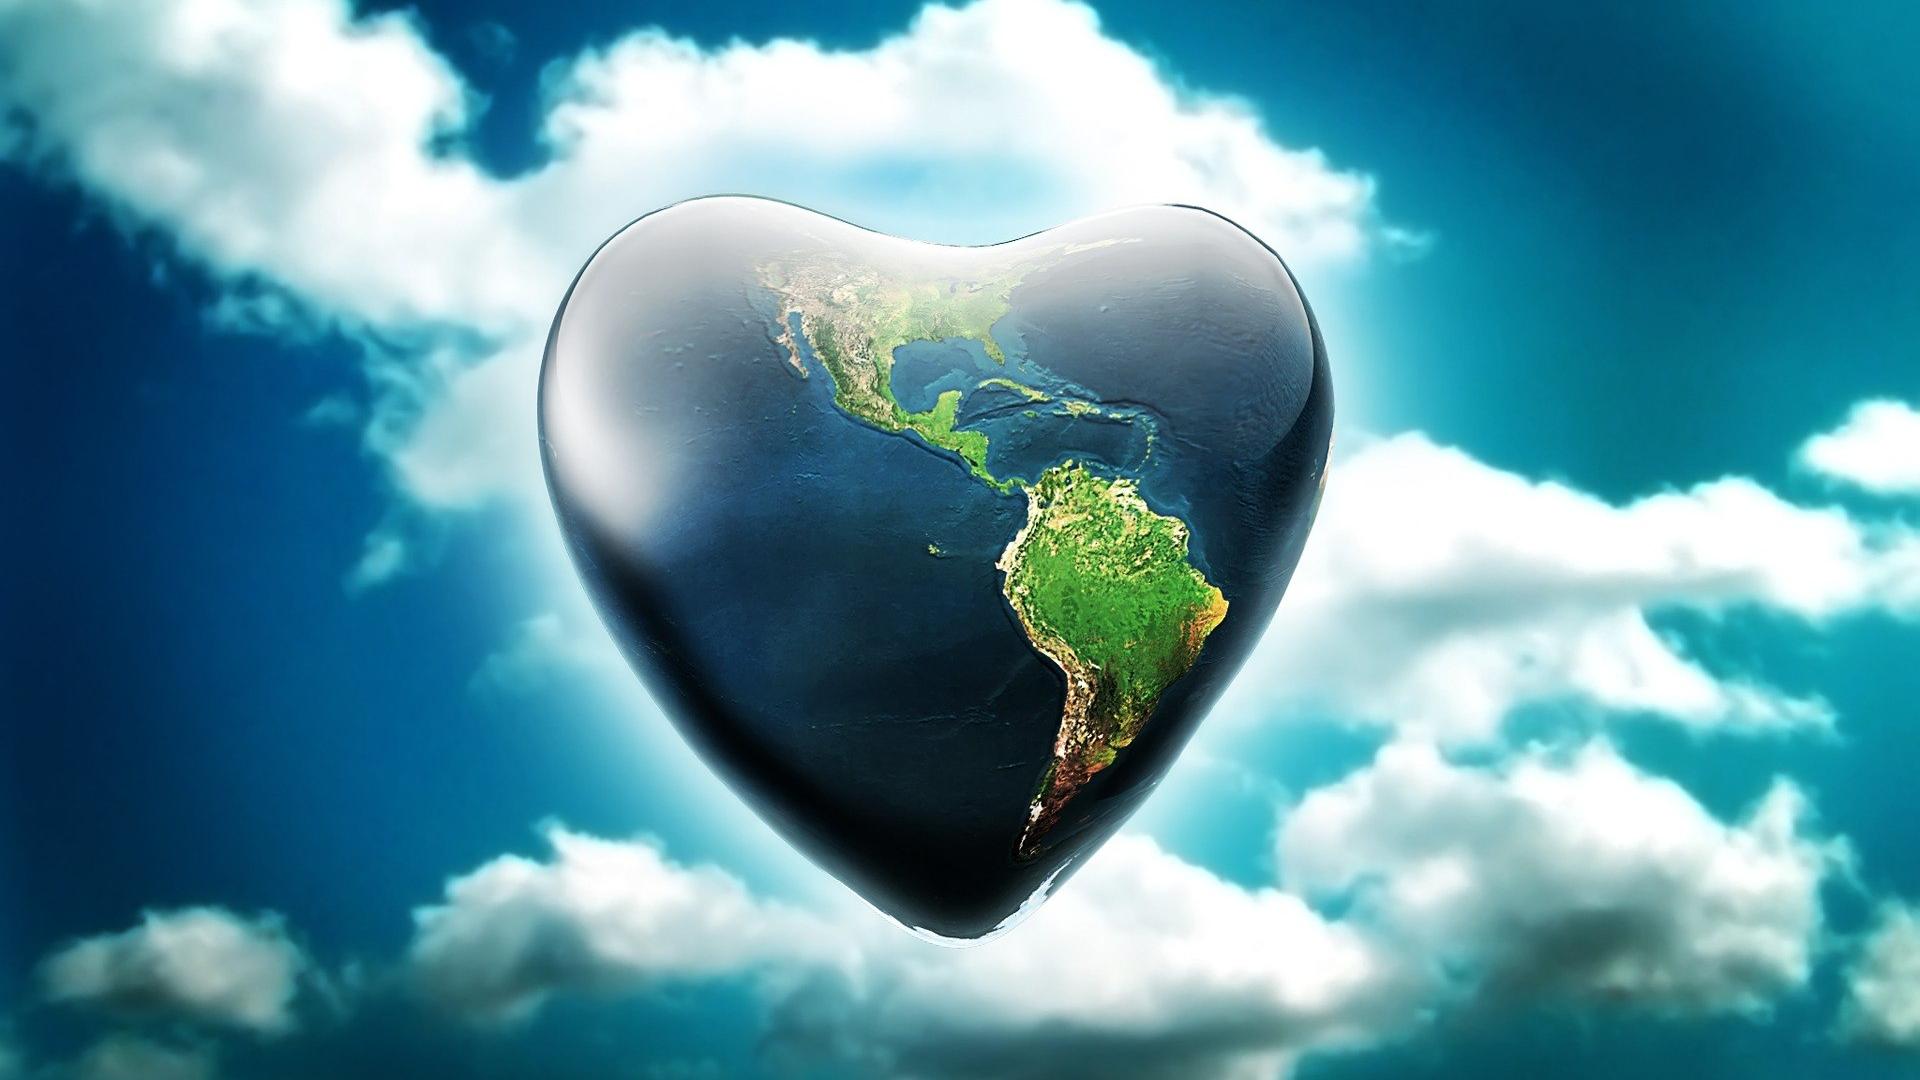 Love and peace awesome earth image HD Wallpaper wallpaper -